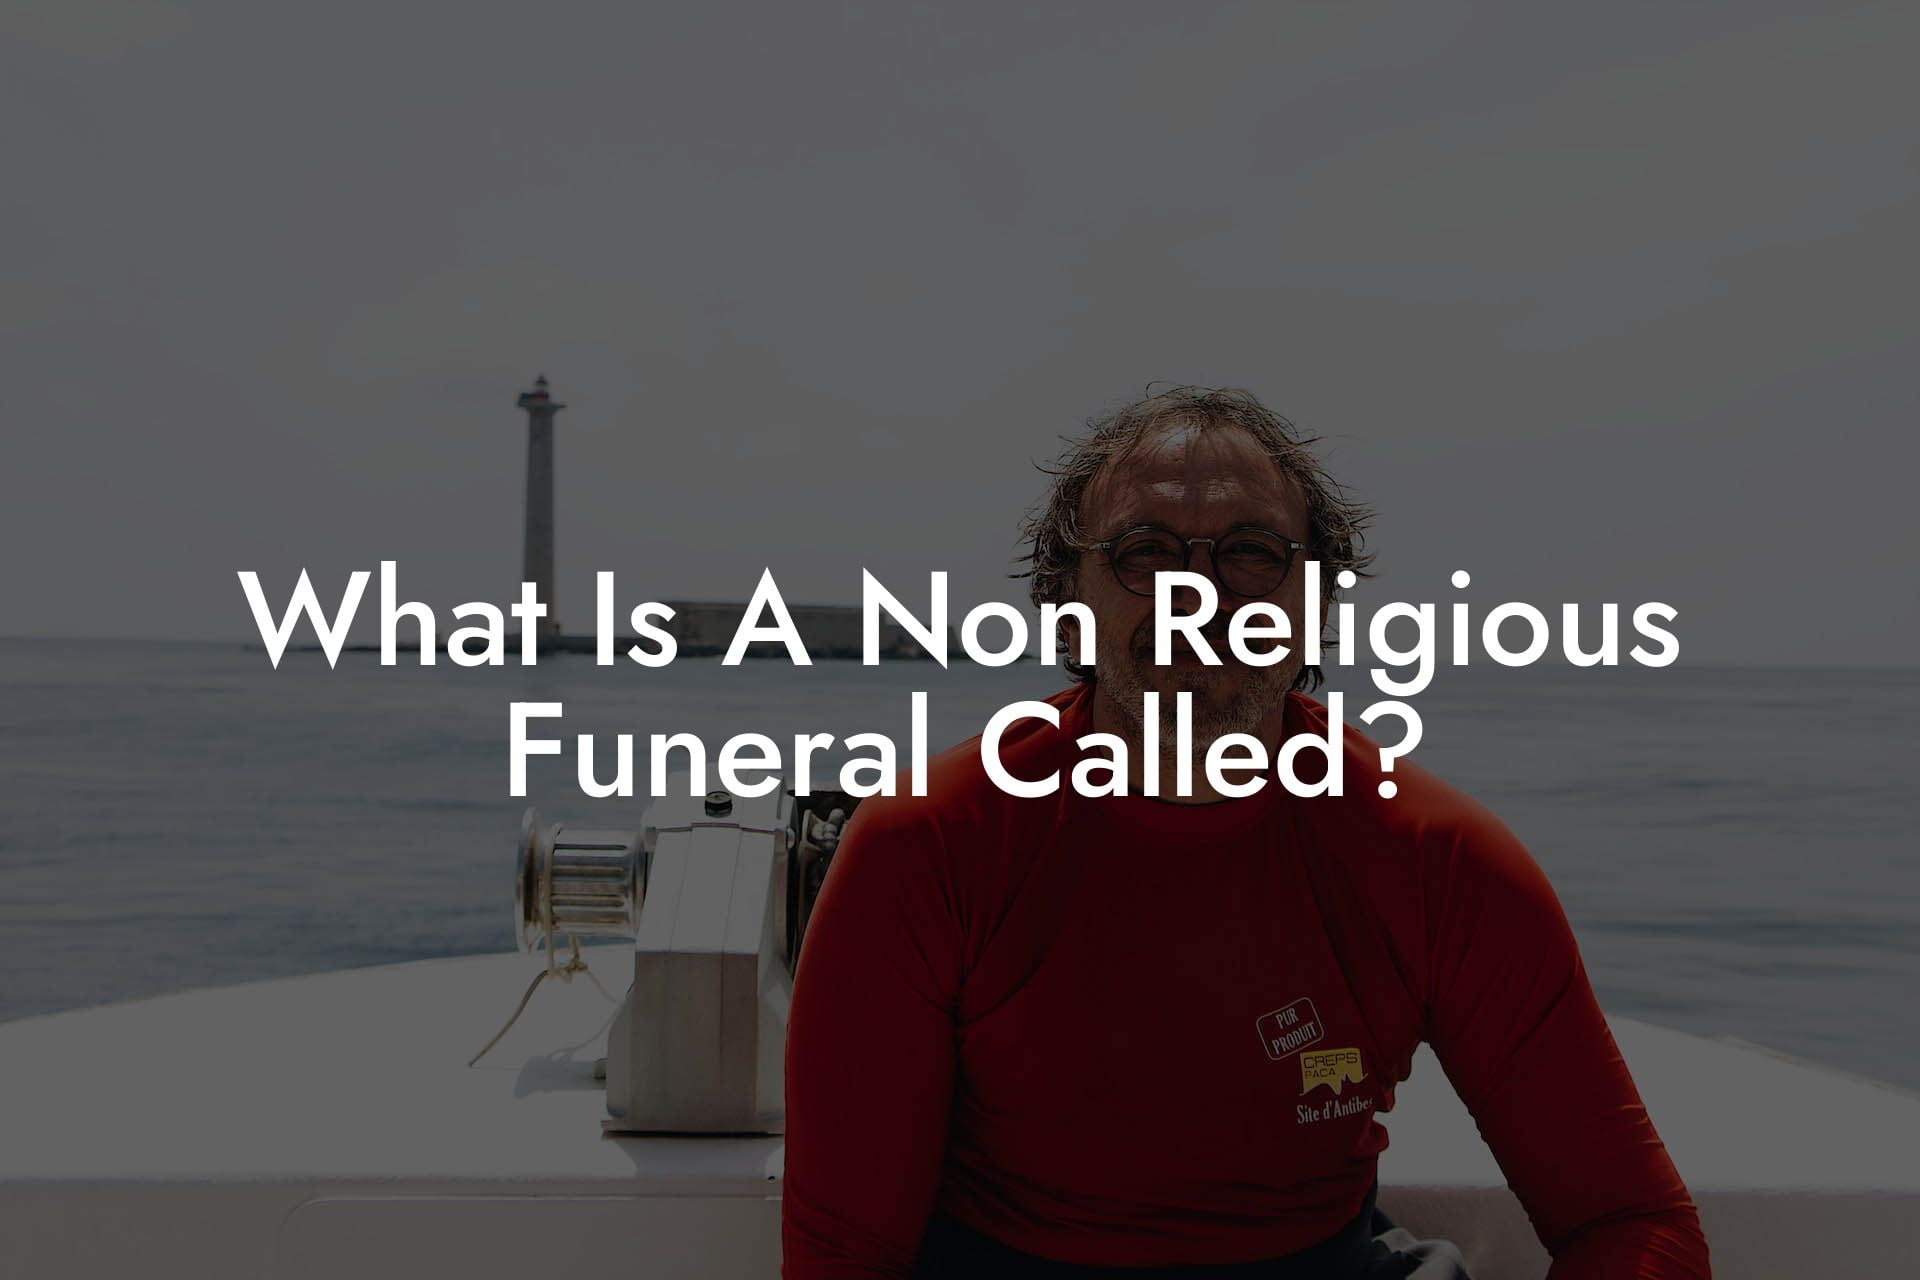 What Is A Non Religious Funeral Called?